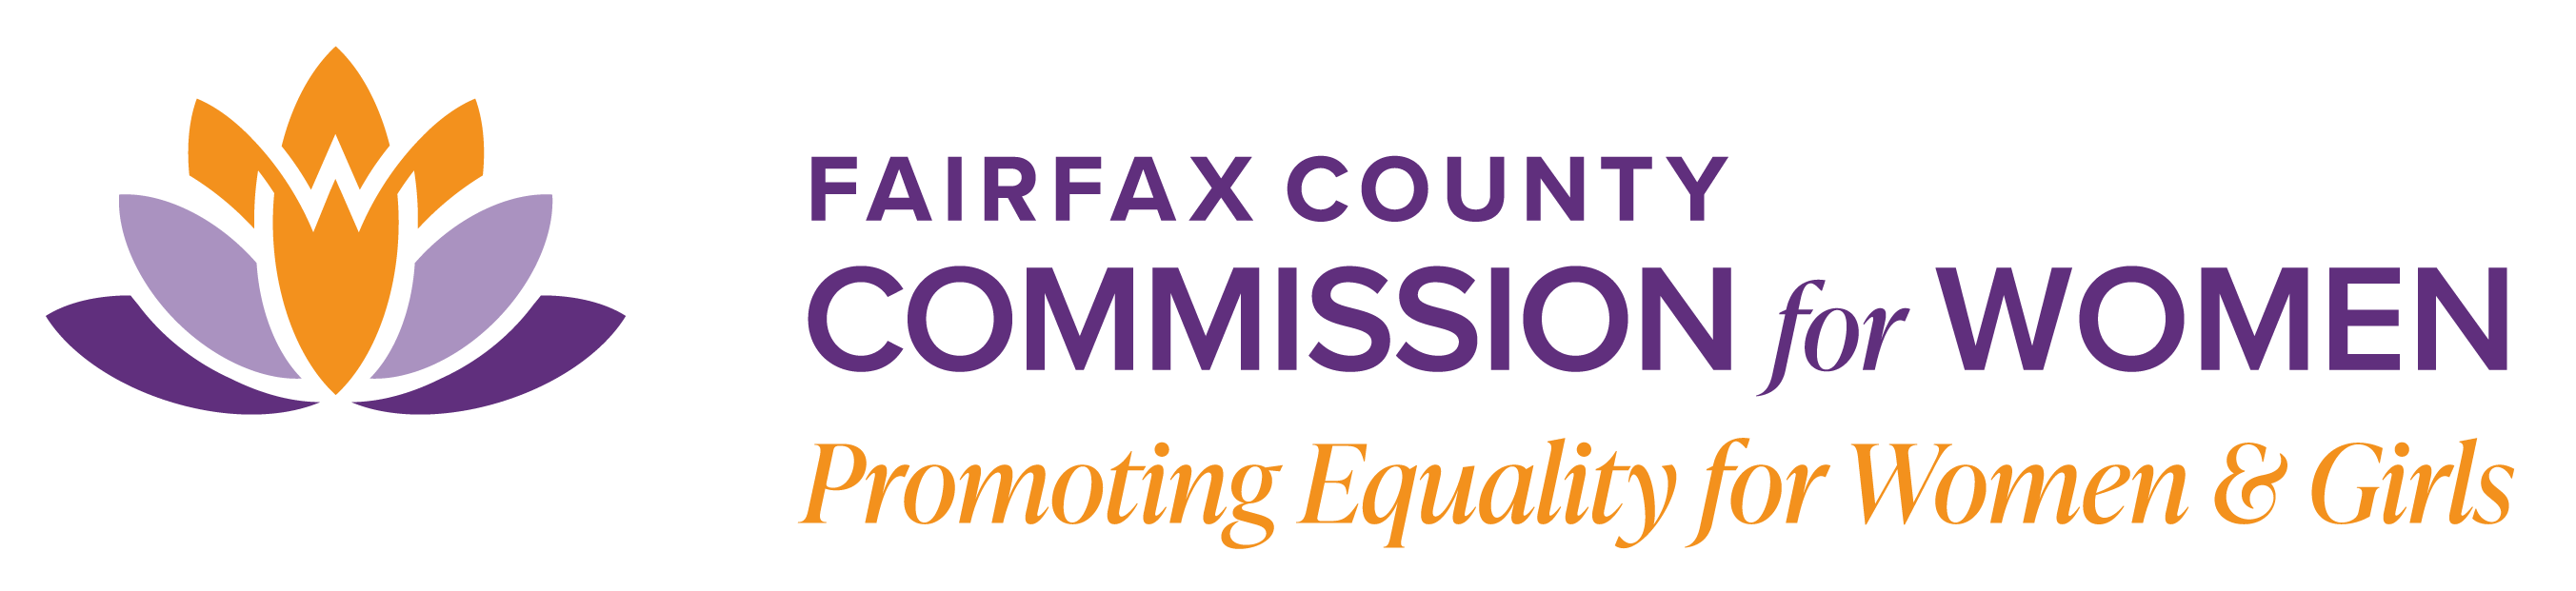 Fairfax County Commission for Women banner graphic; Promoting Equality for Women and Girls